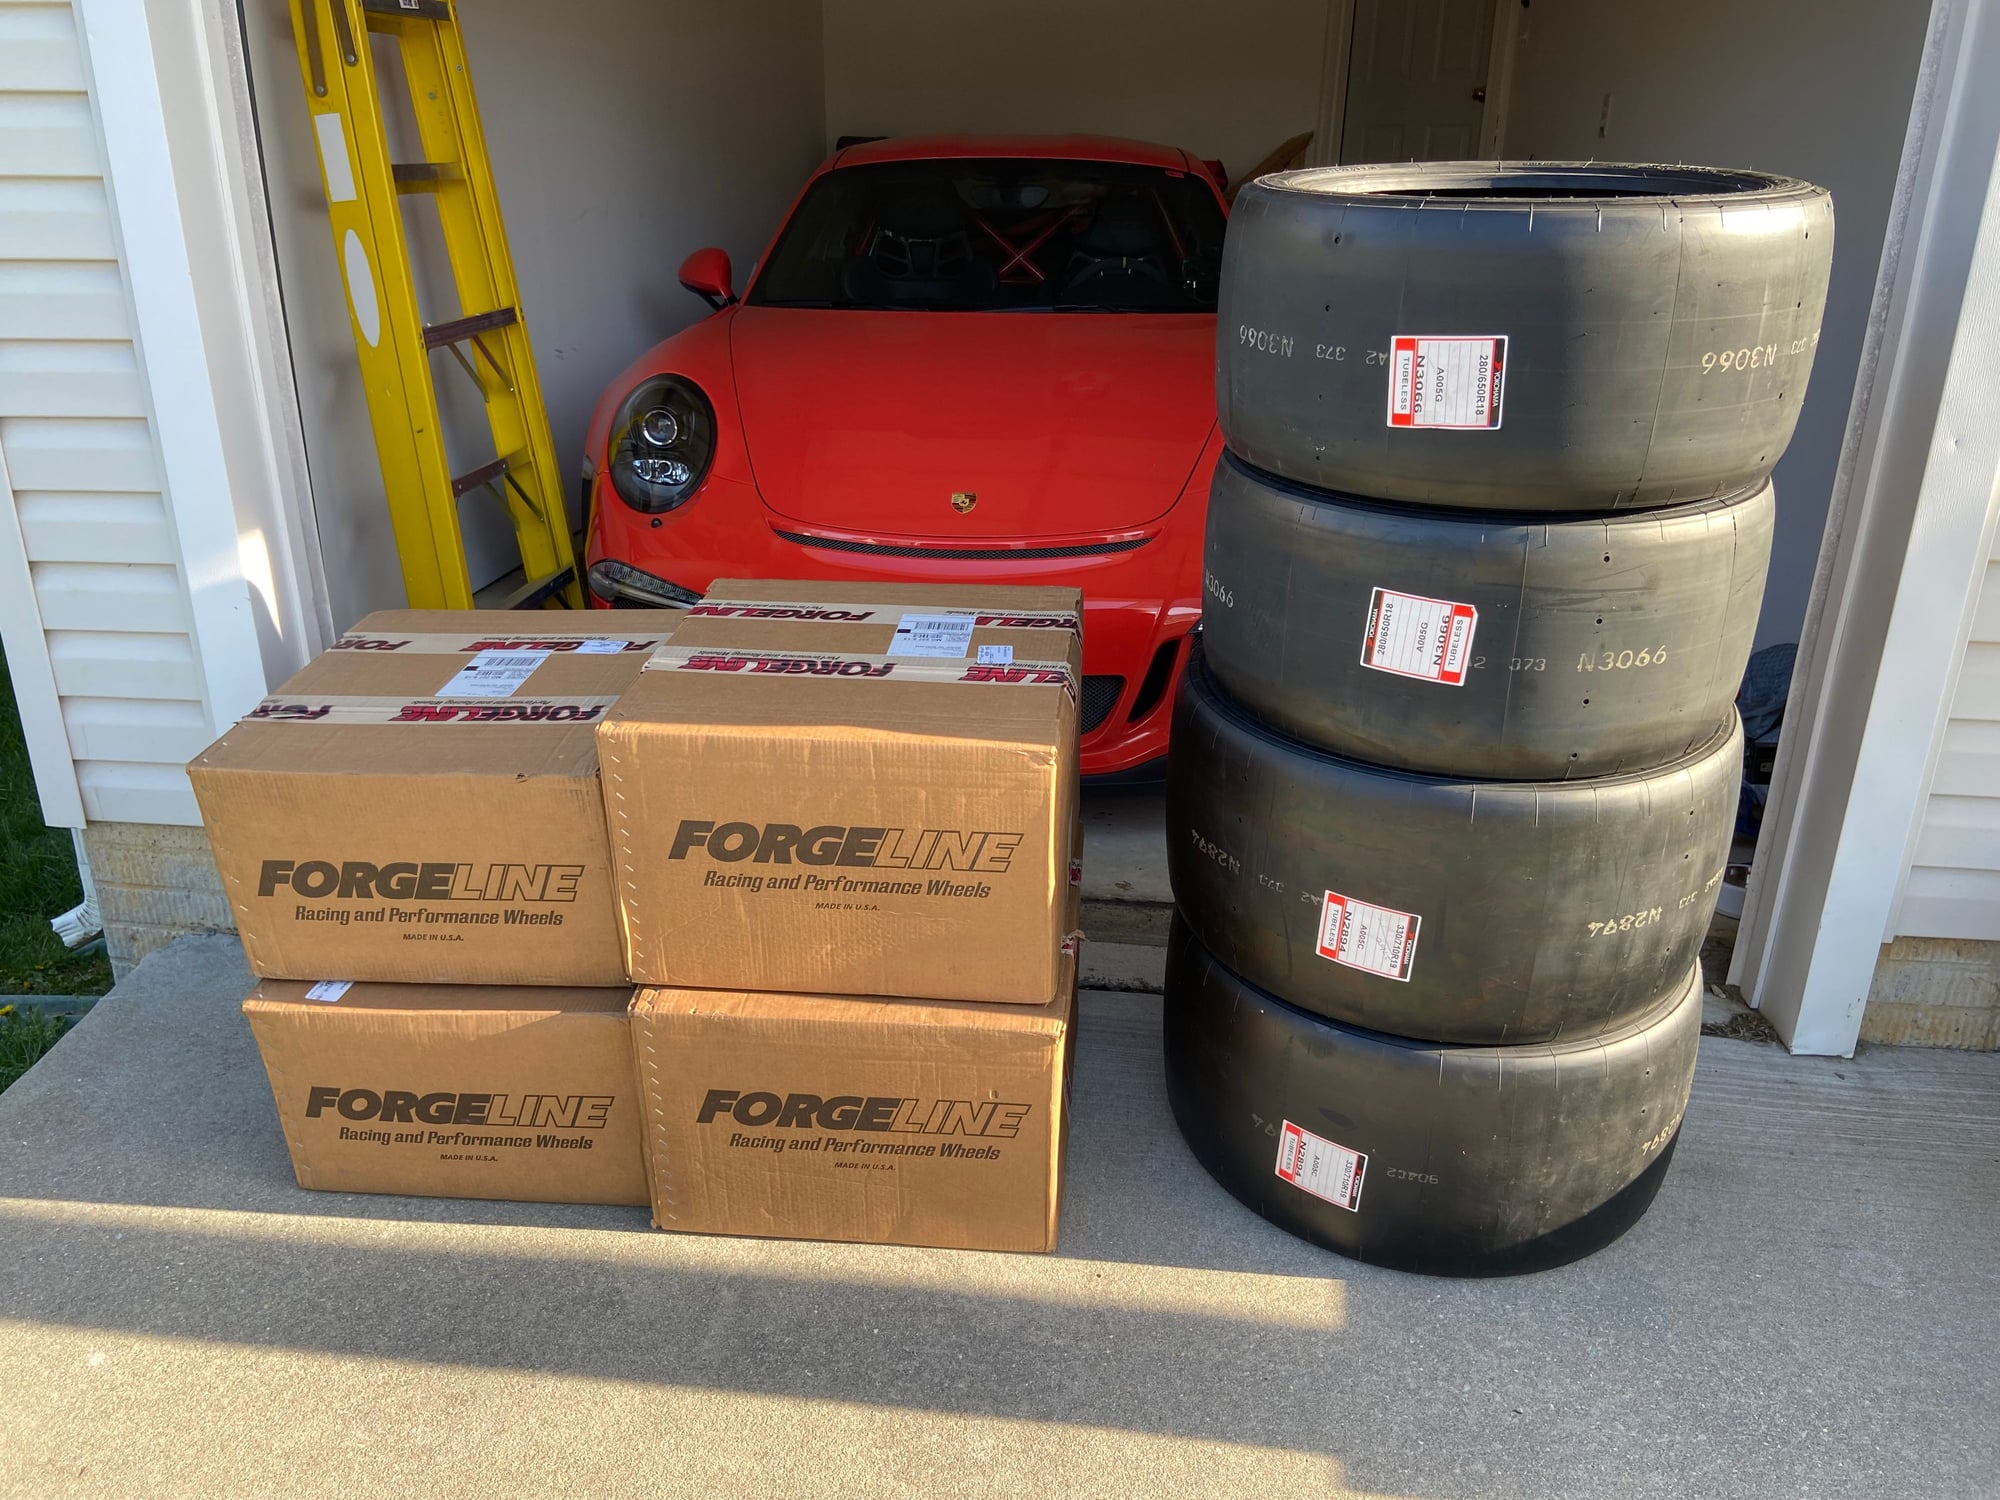 Wheels and Tires/Axles - 991 GT2RS/3RS - New set of Forgeline GS1-R Wheels & Slicks - New - Catonsville, MD 21228, United States